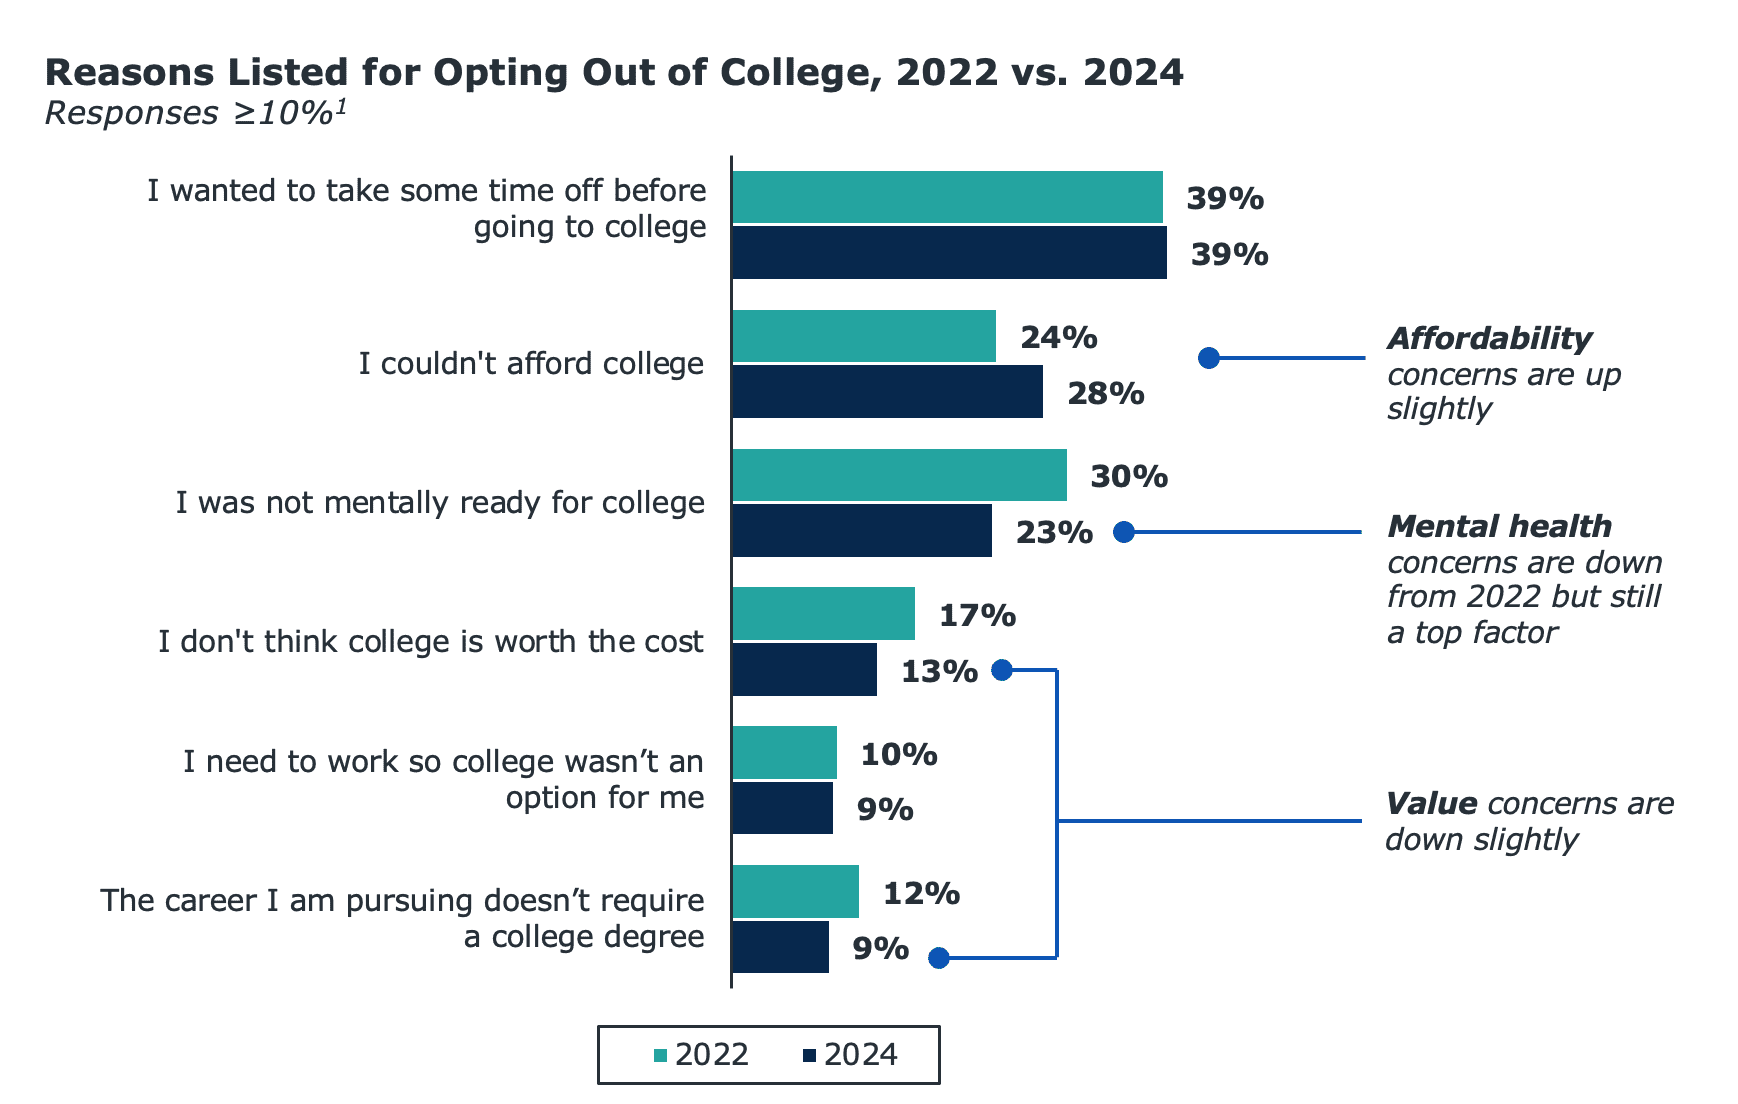 Bar chart comparing the reasons for opting out of college between 2022 and 2024.